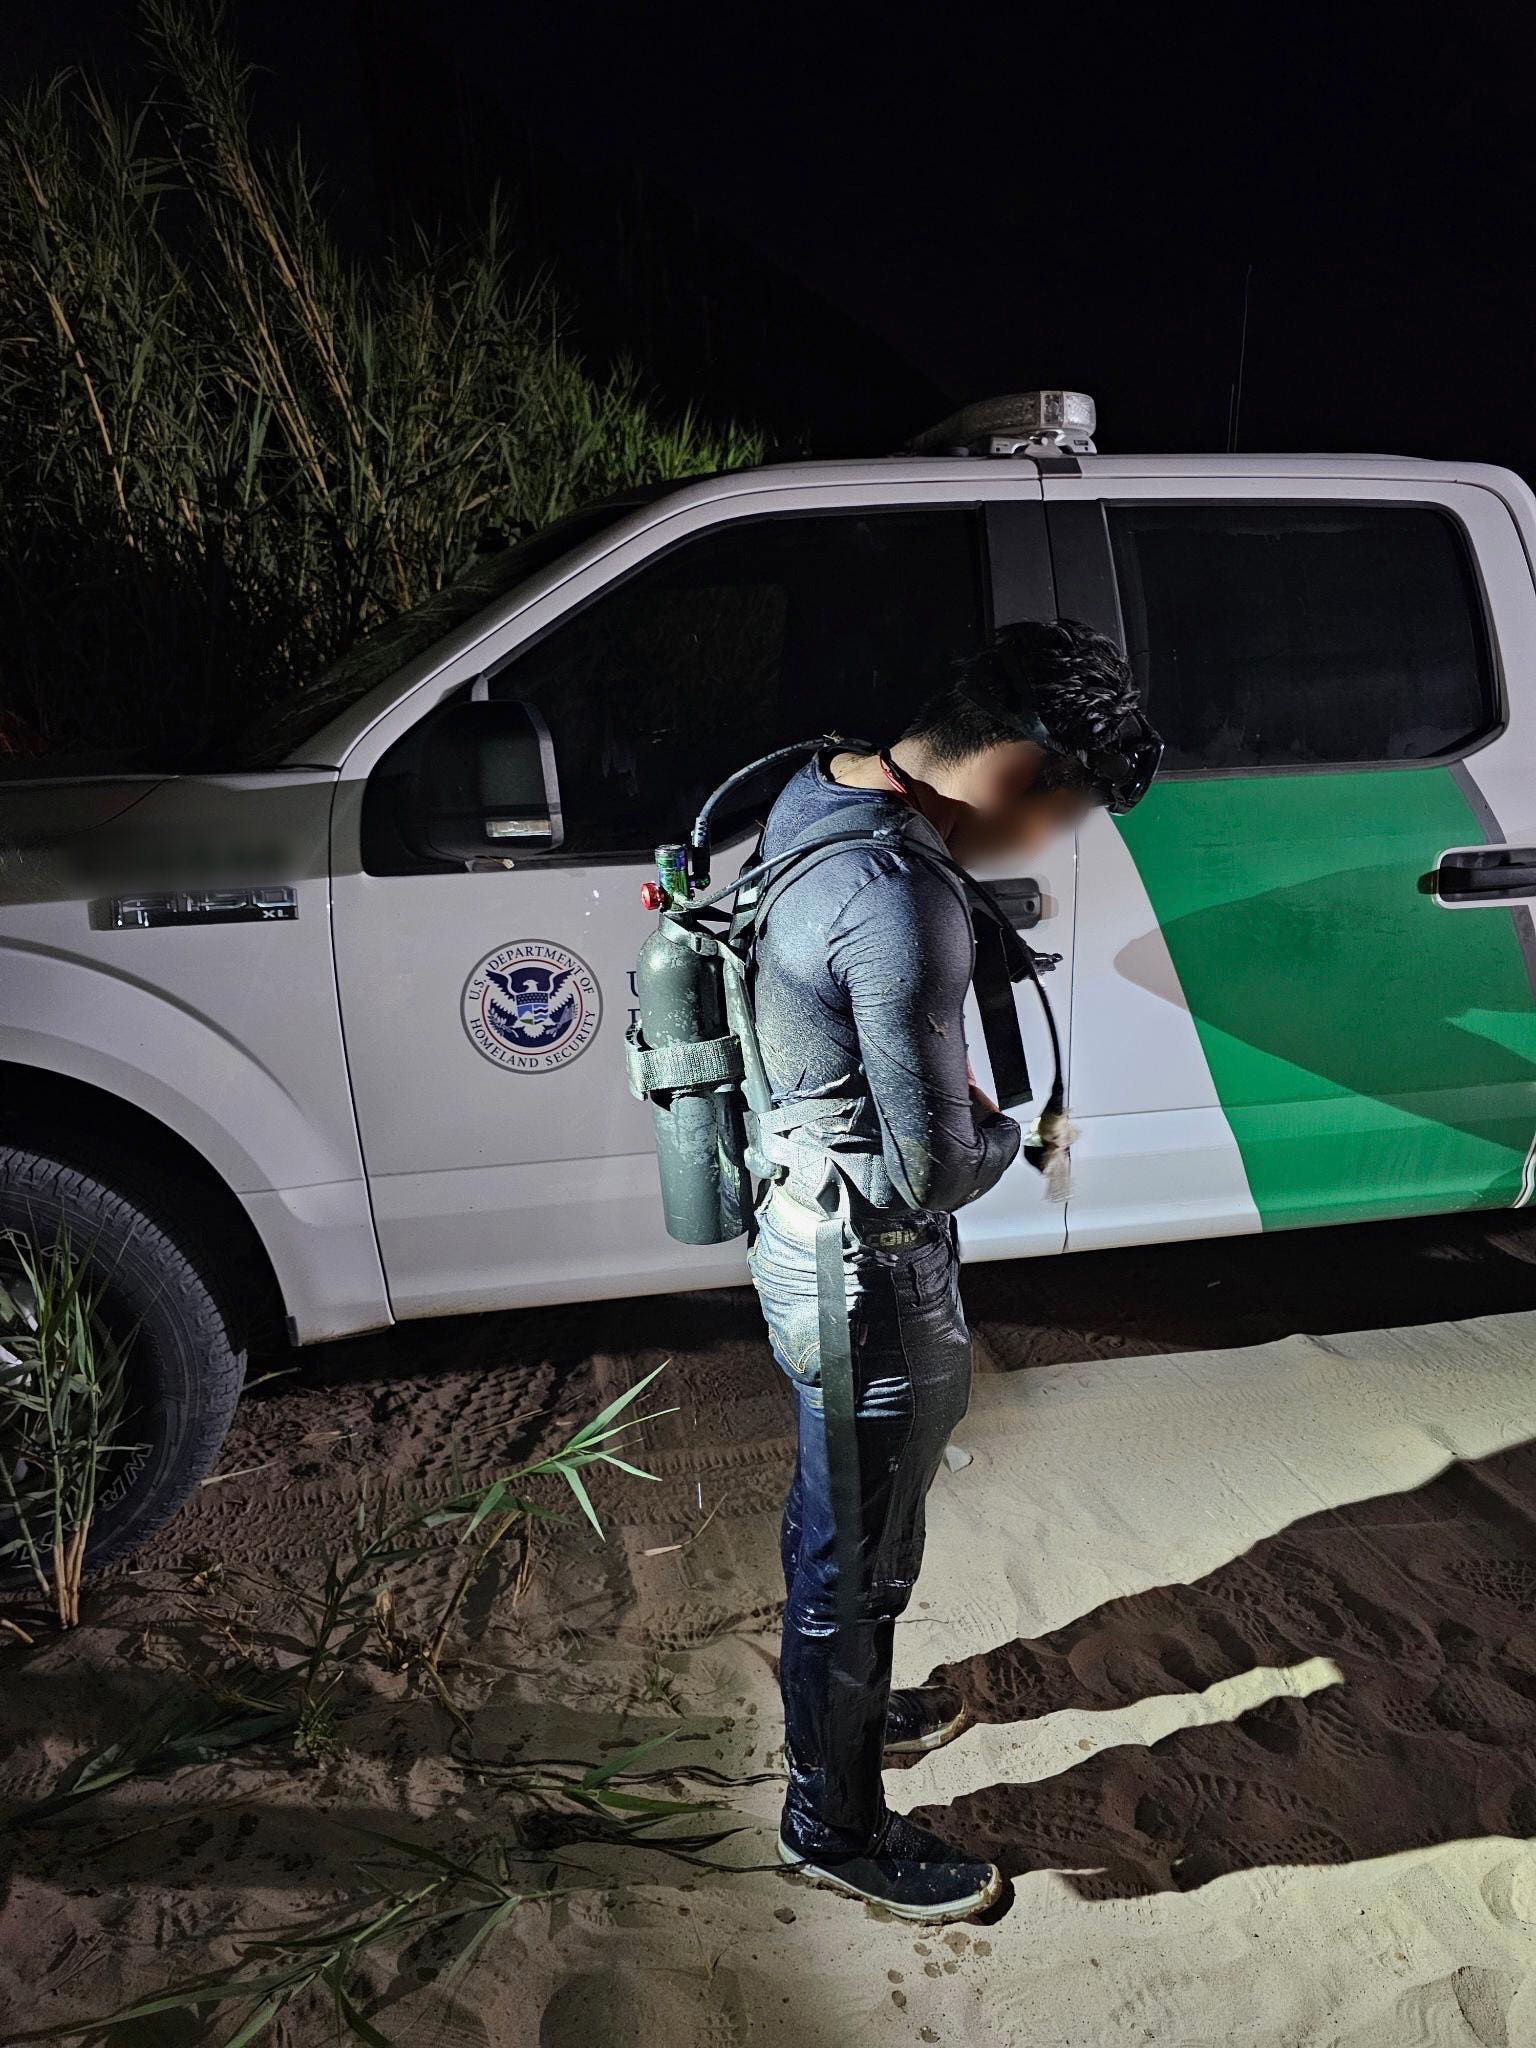 Migrant caught attempting to scuba dive across border into US, Border Patrol says